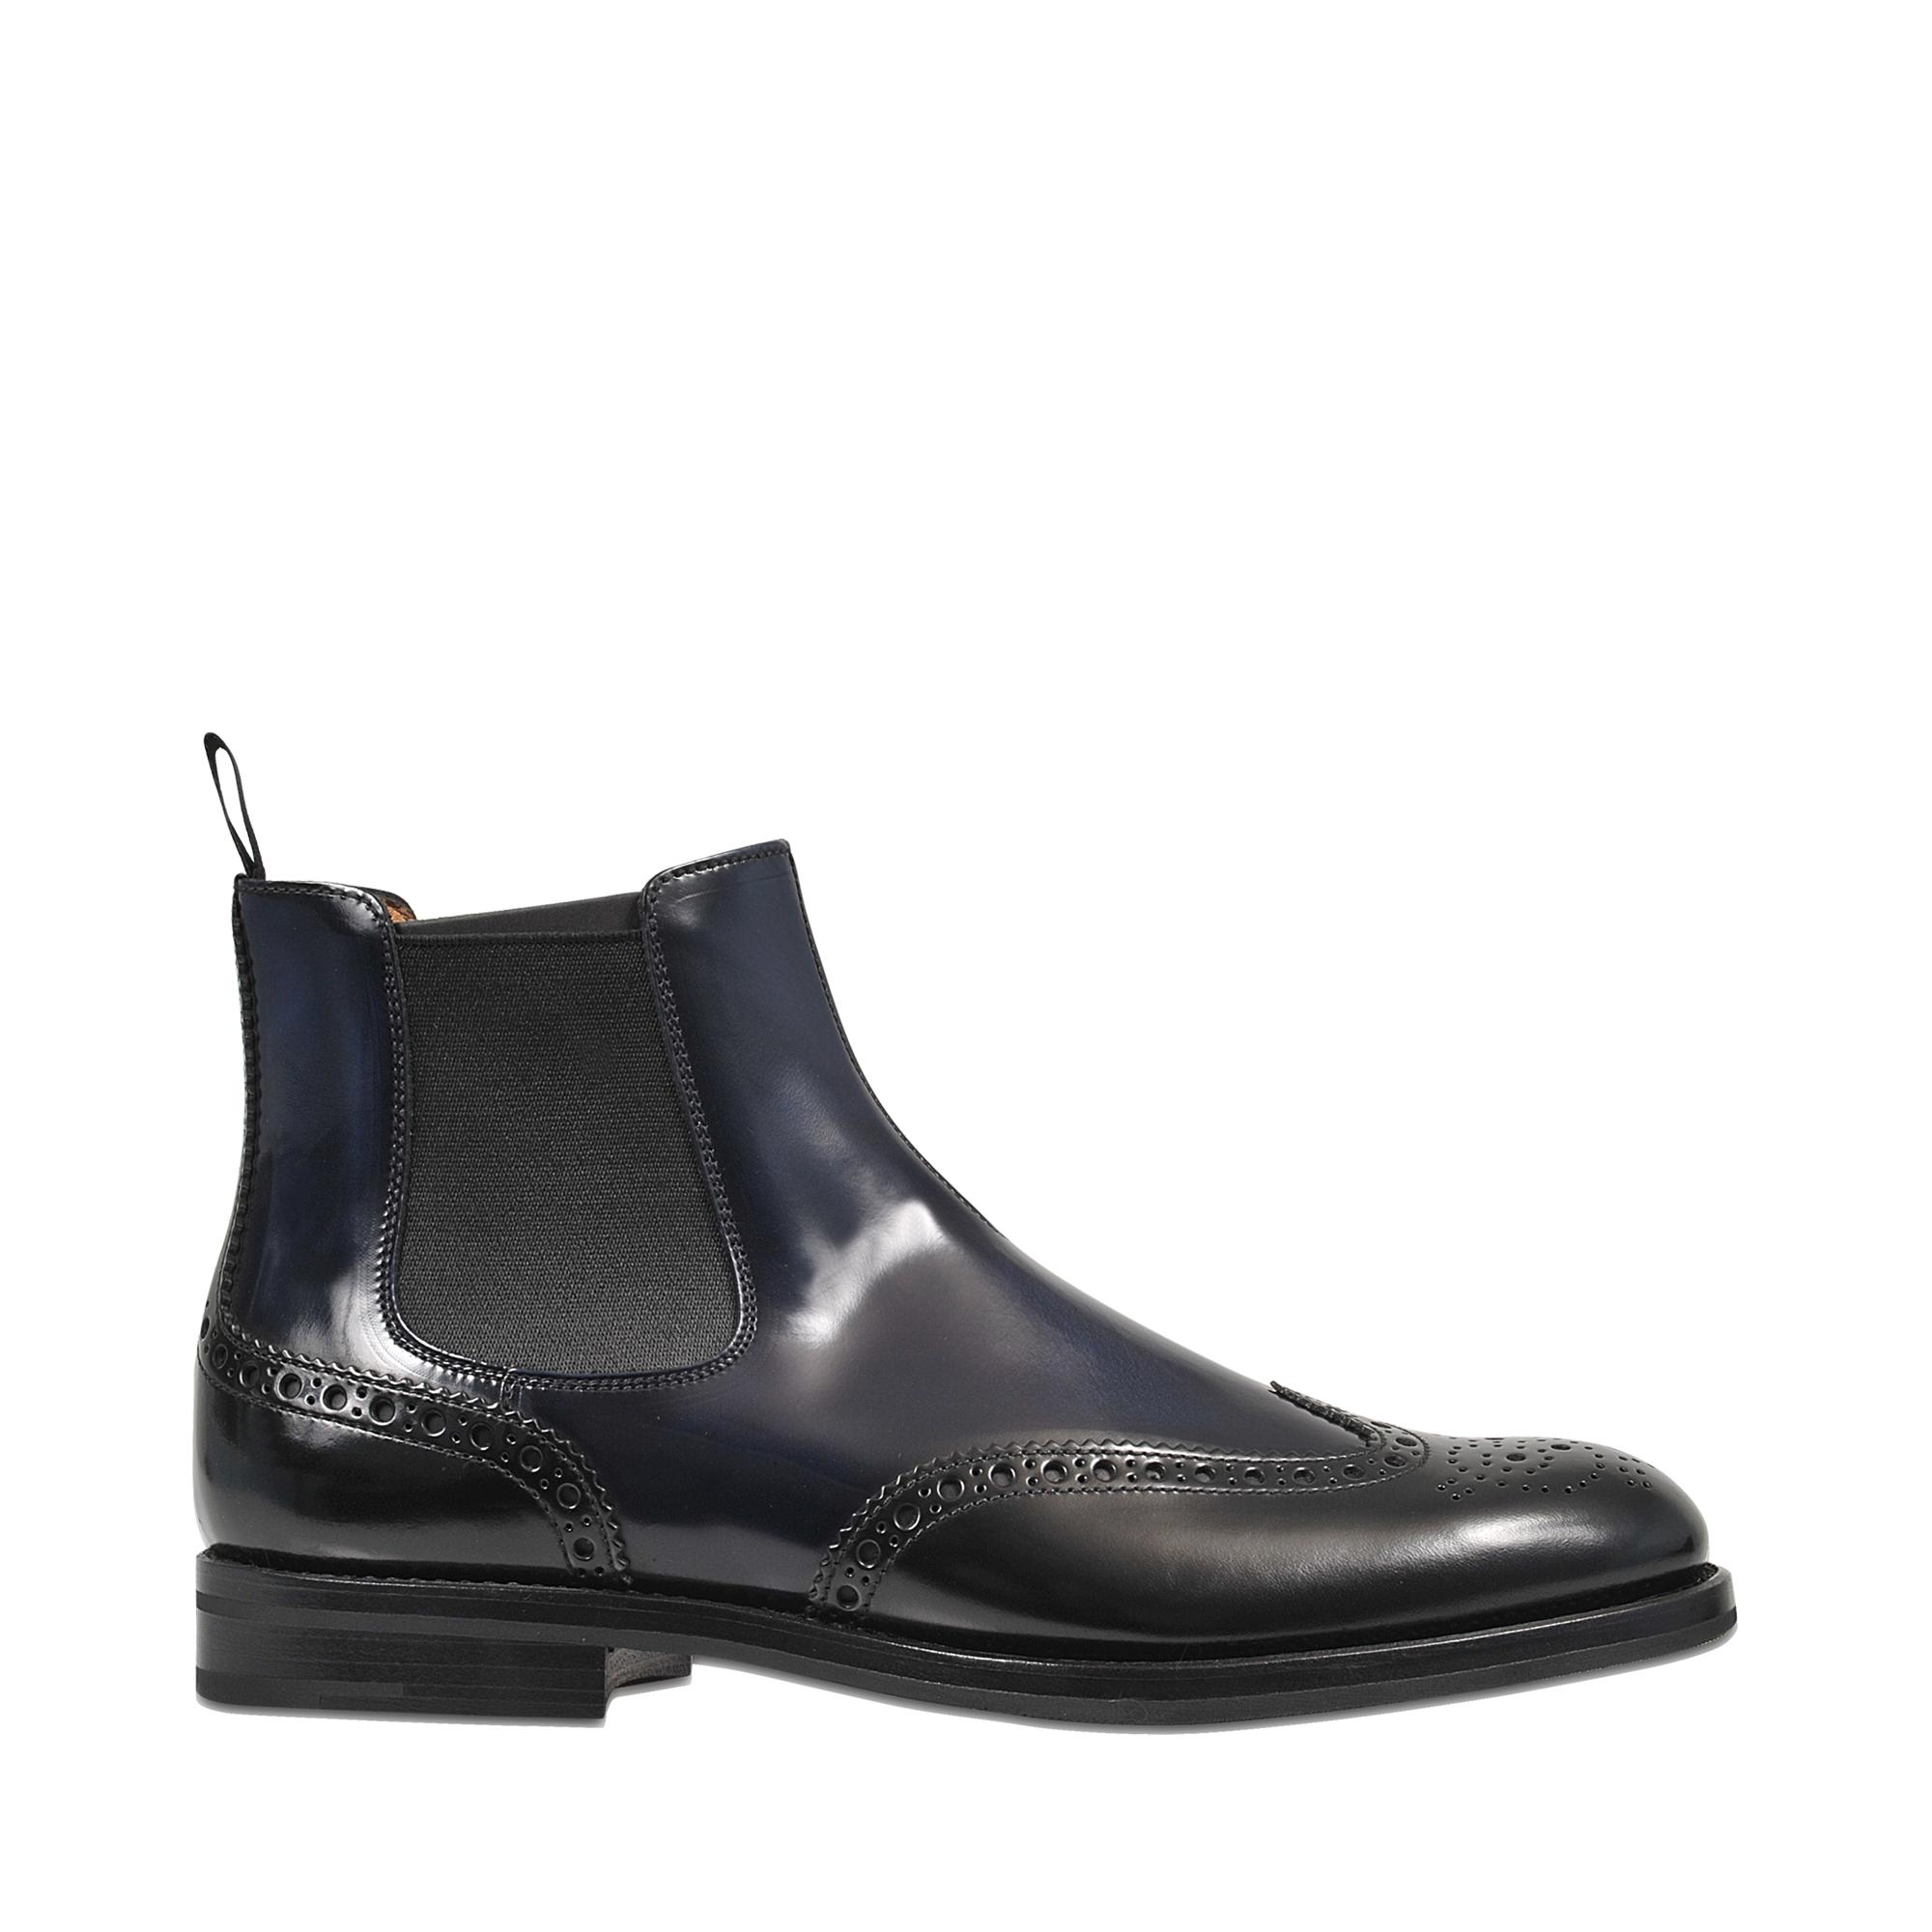 Church's Leather Ketsby Chelsea Boot in Black - Lyst